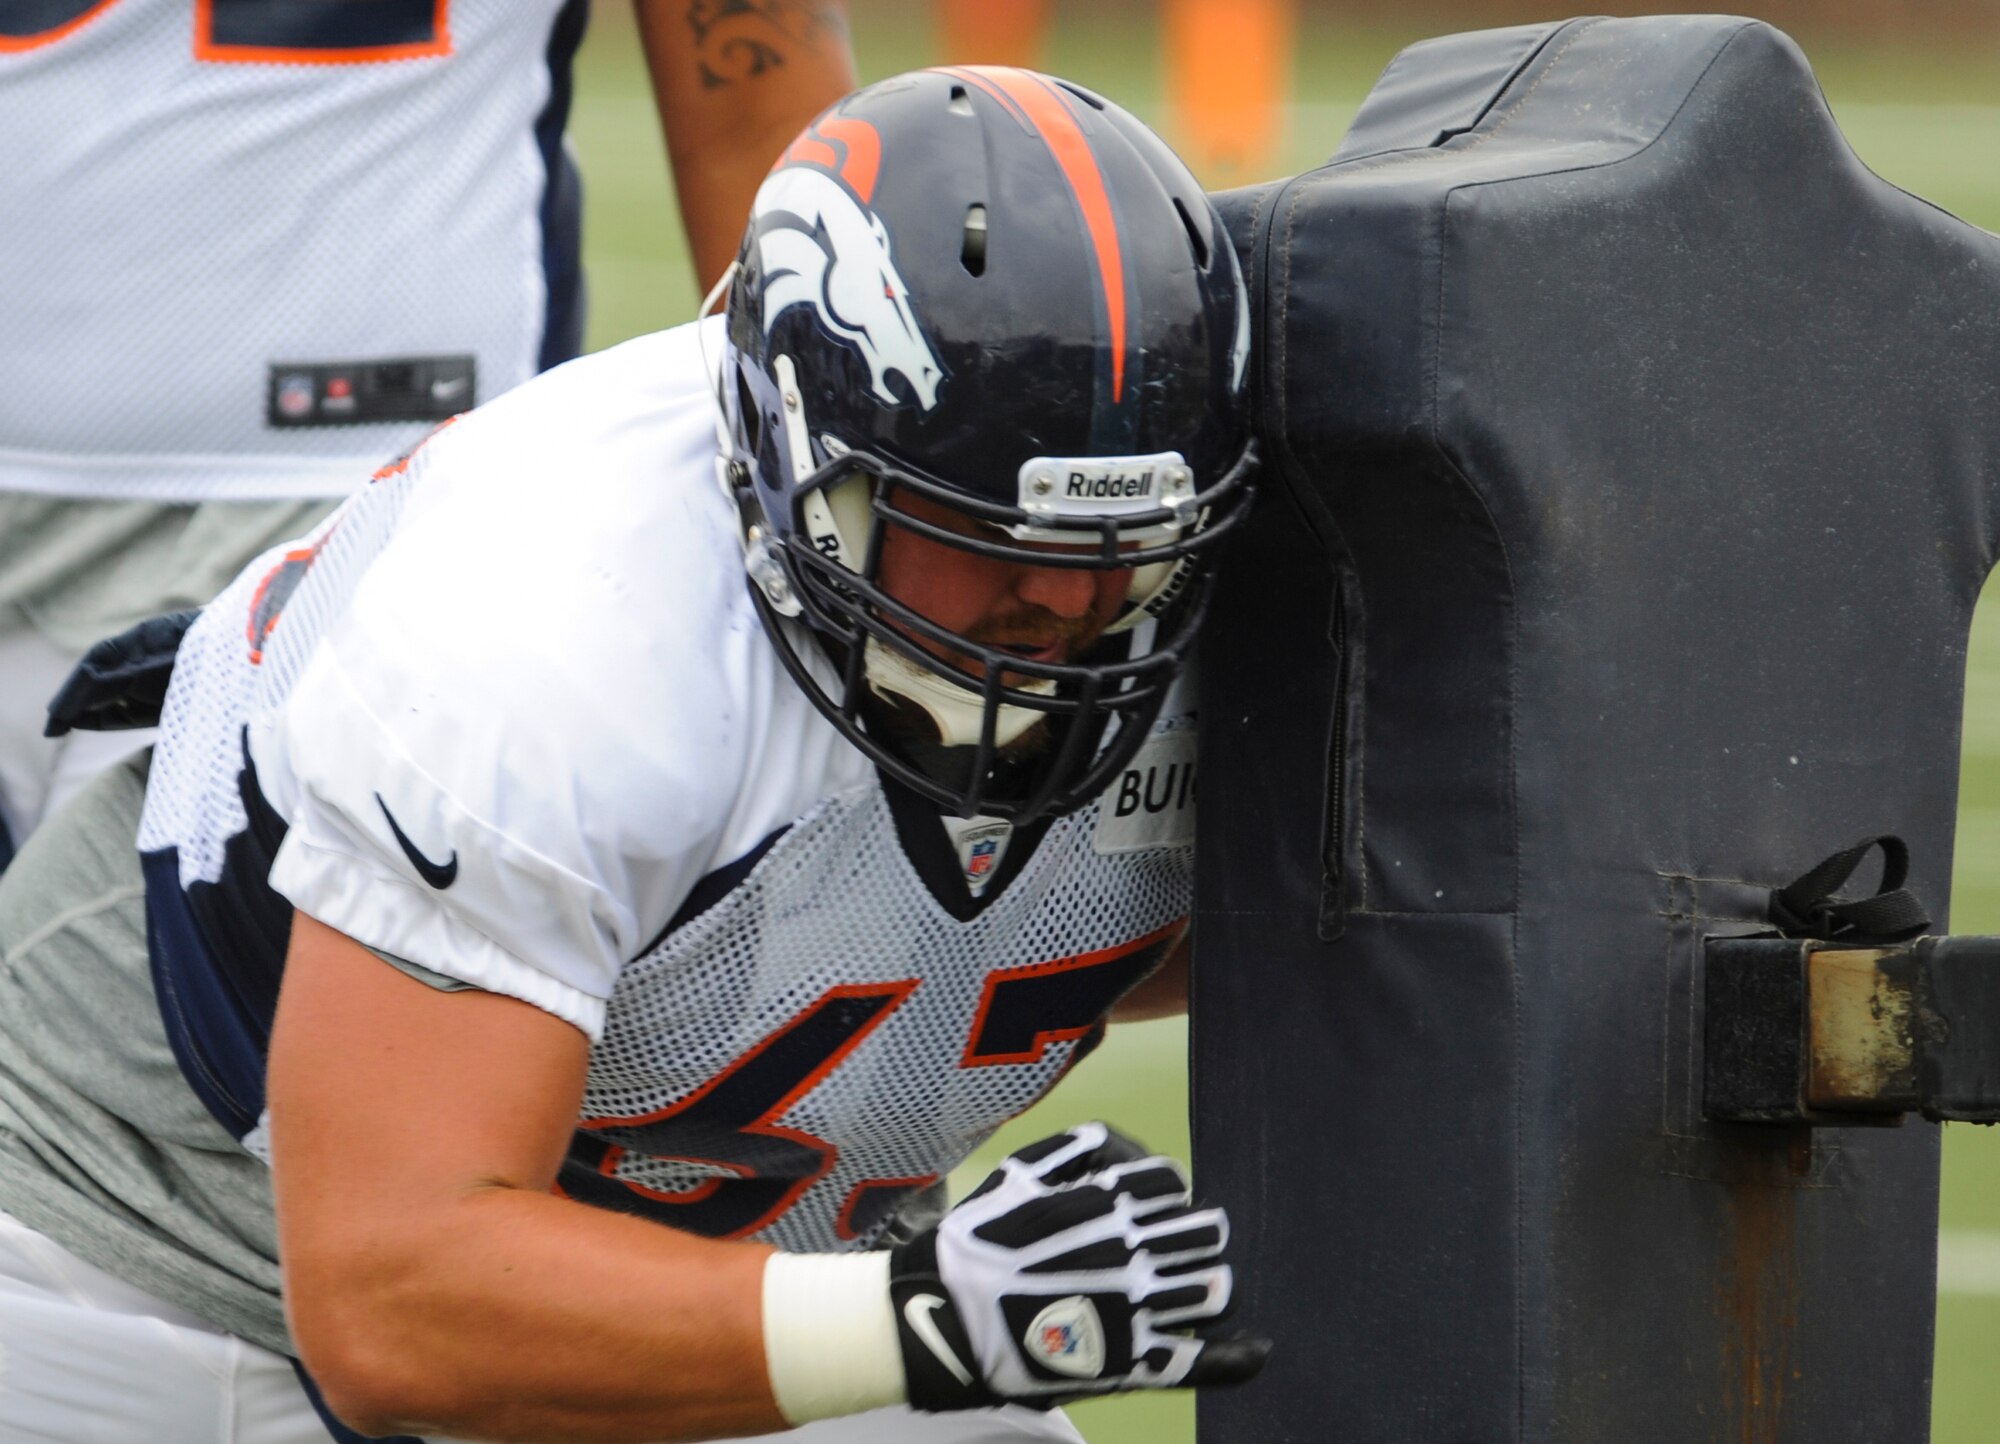 Benjamin Garland, Denver Broncos offensive guard, hits the sled during an offensive line drill at a Broncos training camp practice July 29, 2013, at the Broncos training facility, Englewood, Colo. Garland spent last season on the Broncos practice squad and transitioned from defensive tackle to offensive guard before the Broncos 2013 mini-camp. Garland is also a first lieutenant for the 140th Wing, Colorado Air National Guard, and served his annual commitment during the early part of 2013. (U.S. Air Force photo by Staff Sgt. Christopher Gross/Released)